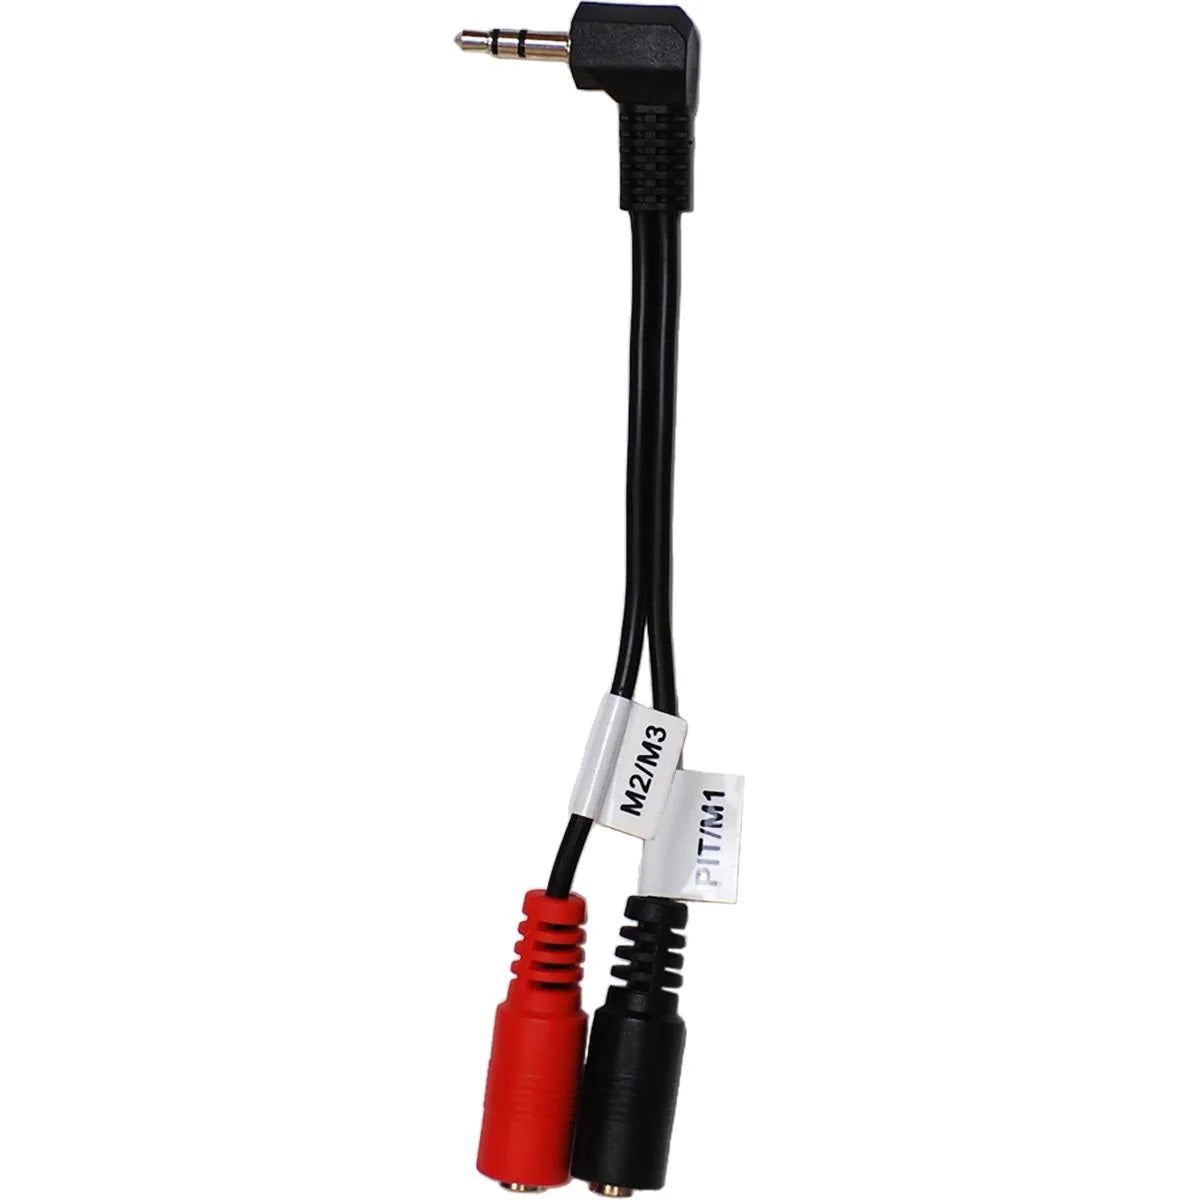 Flame Boss Temperature Probe Y-Cable Flame Boss Indigo Pool Patio BBQ